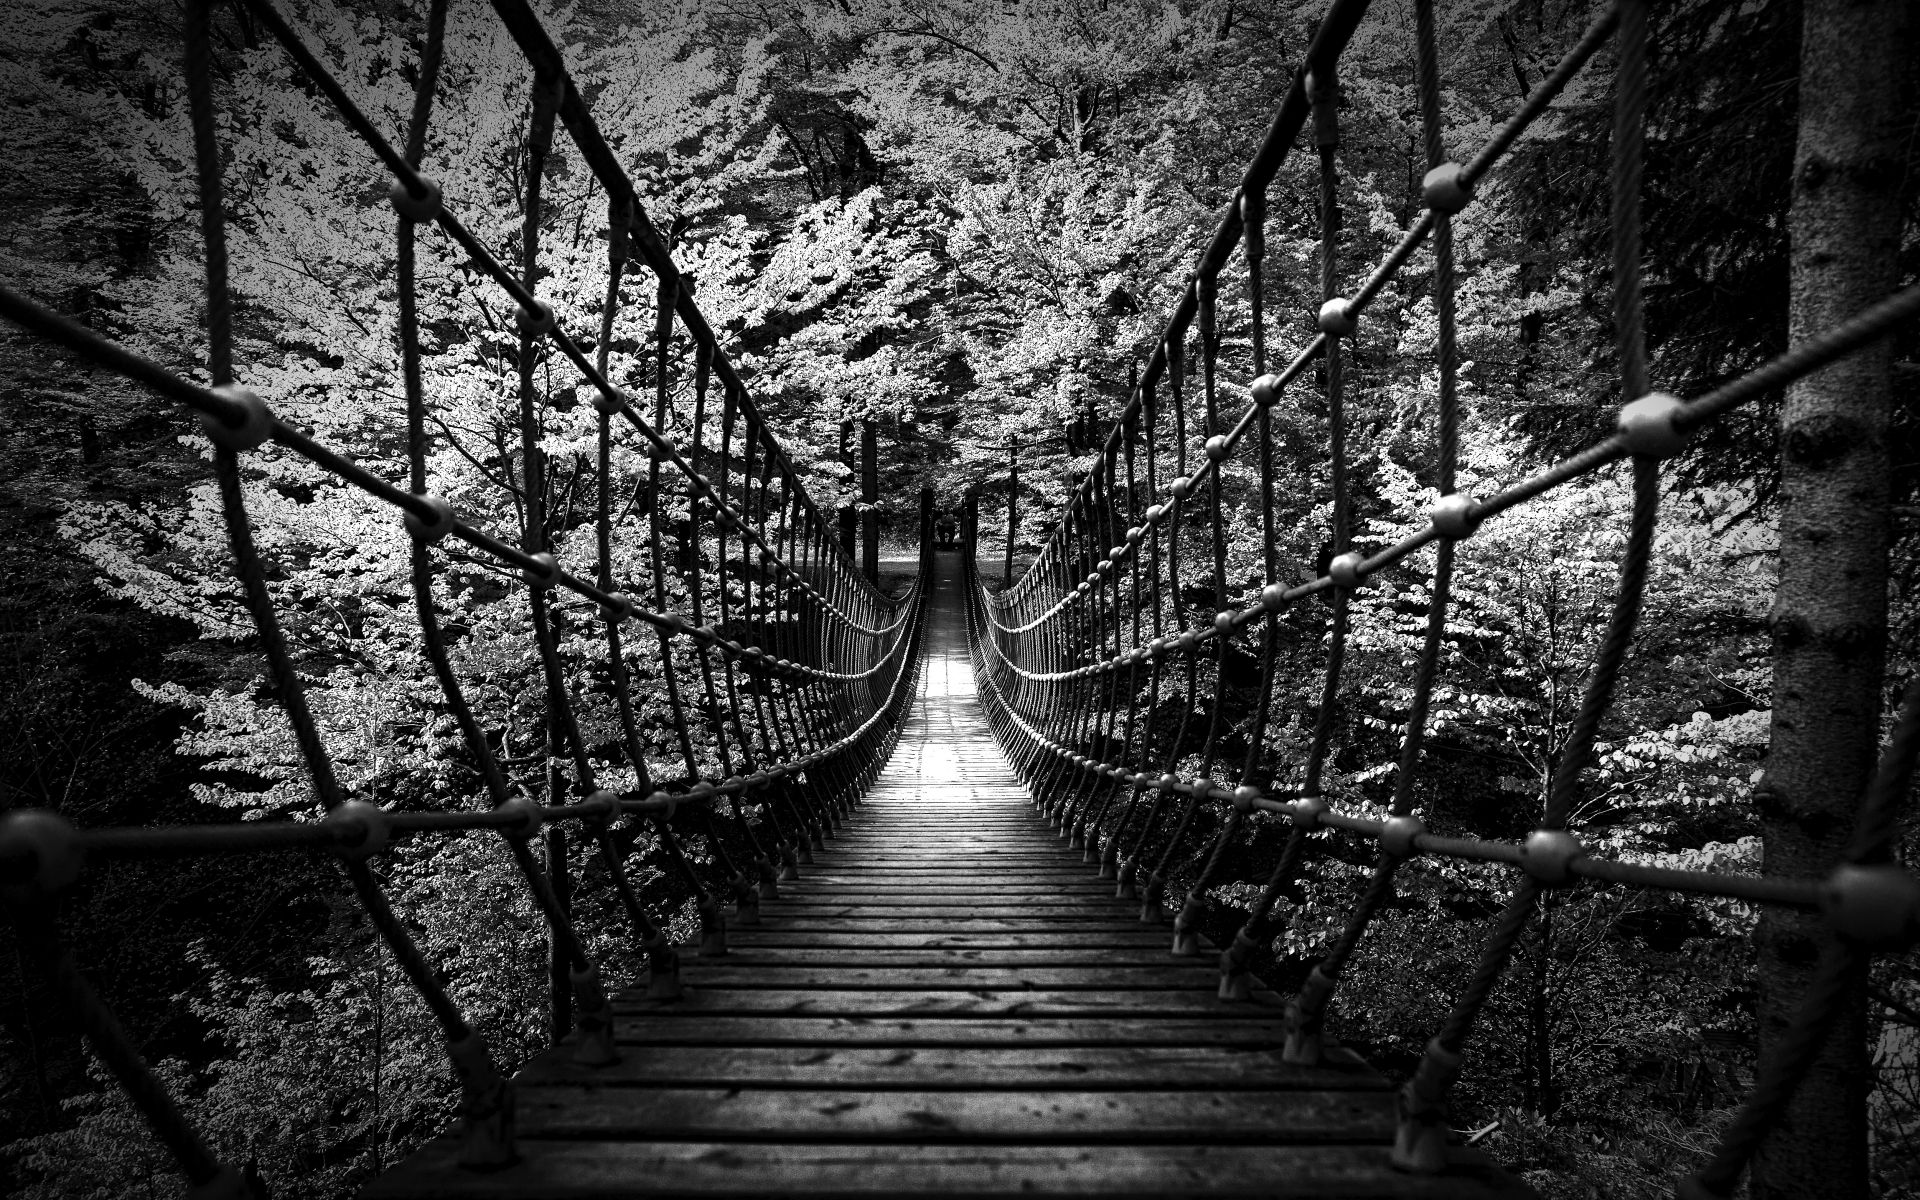 Black White B W Landscapes Nature Wood Rope Scary Bridges Trees Forest